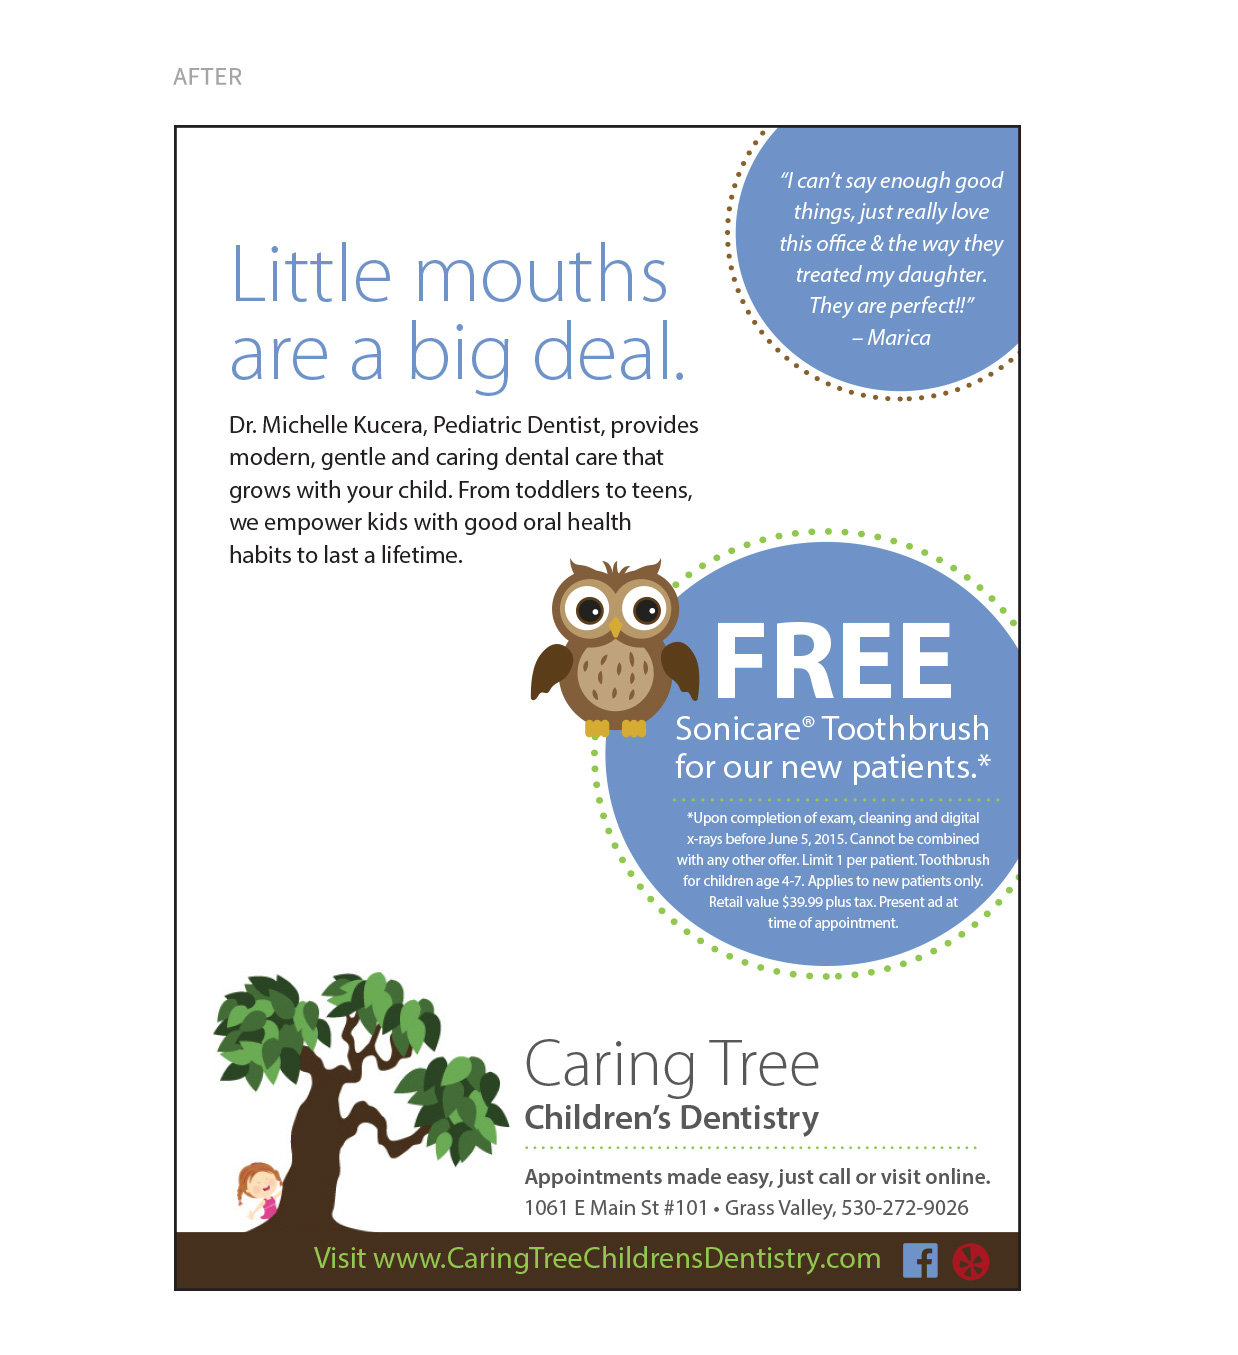 Redesigned Ad for Children's Dentistry Ad